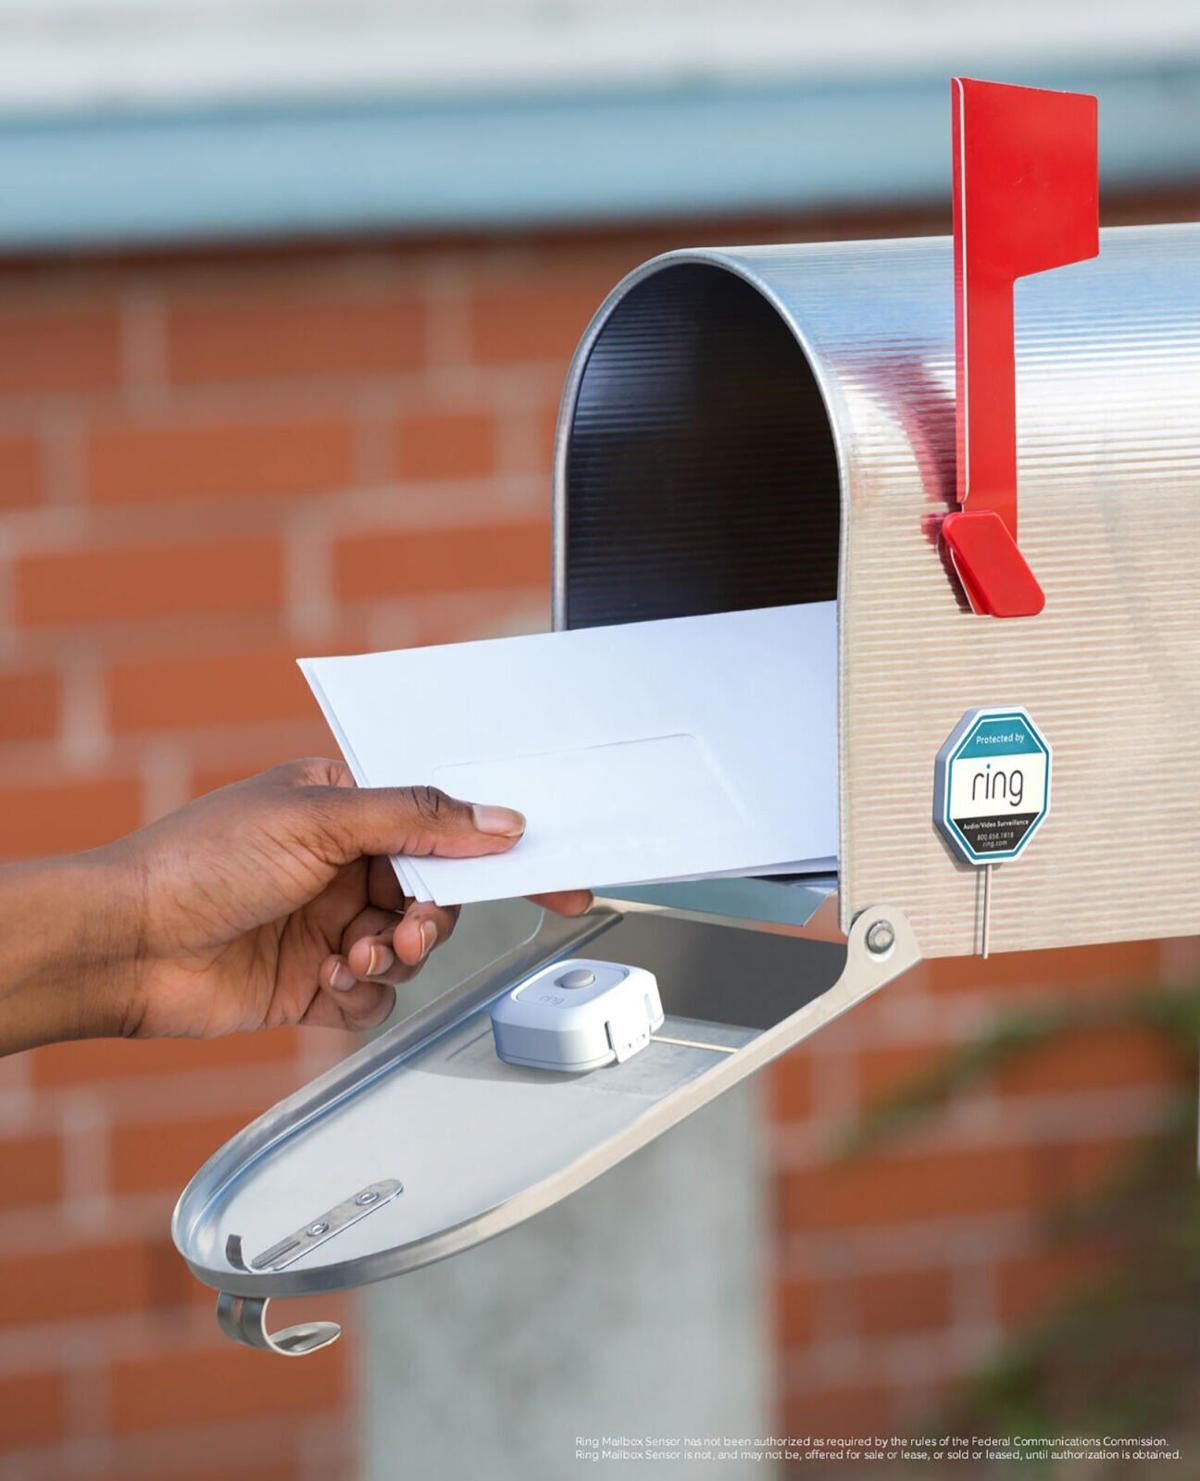 Ring has a mailbox tracking device, which makes tracking deliveries a lot easier.